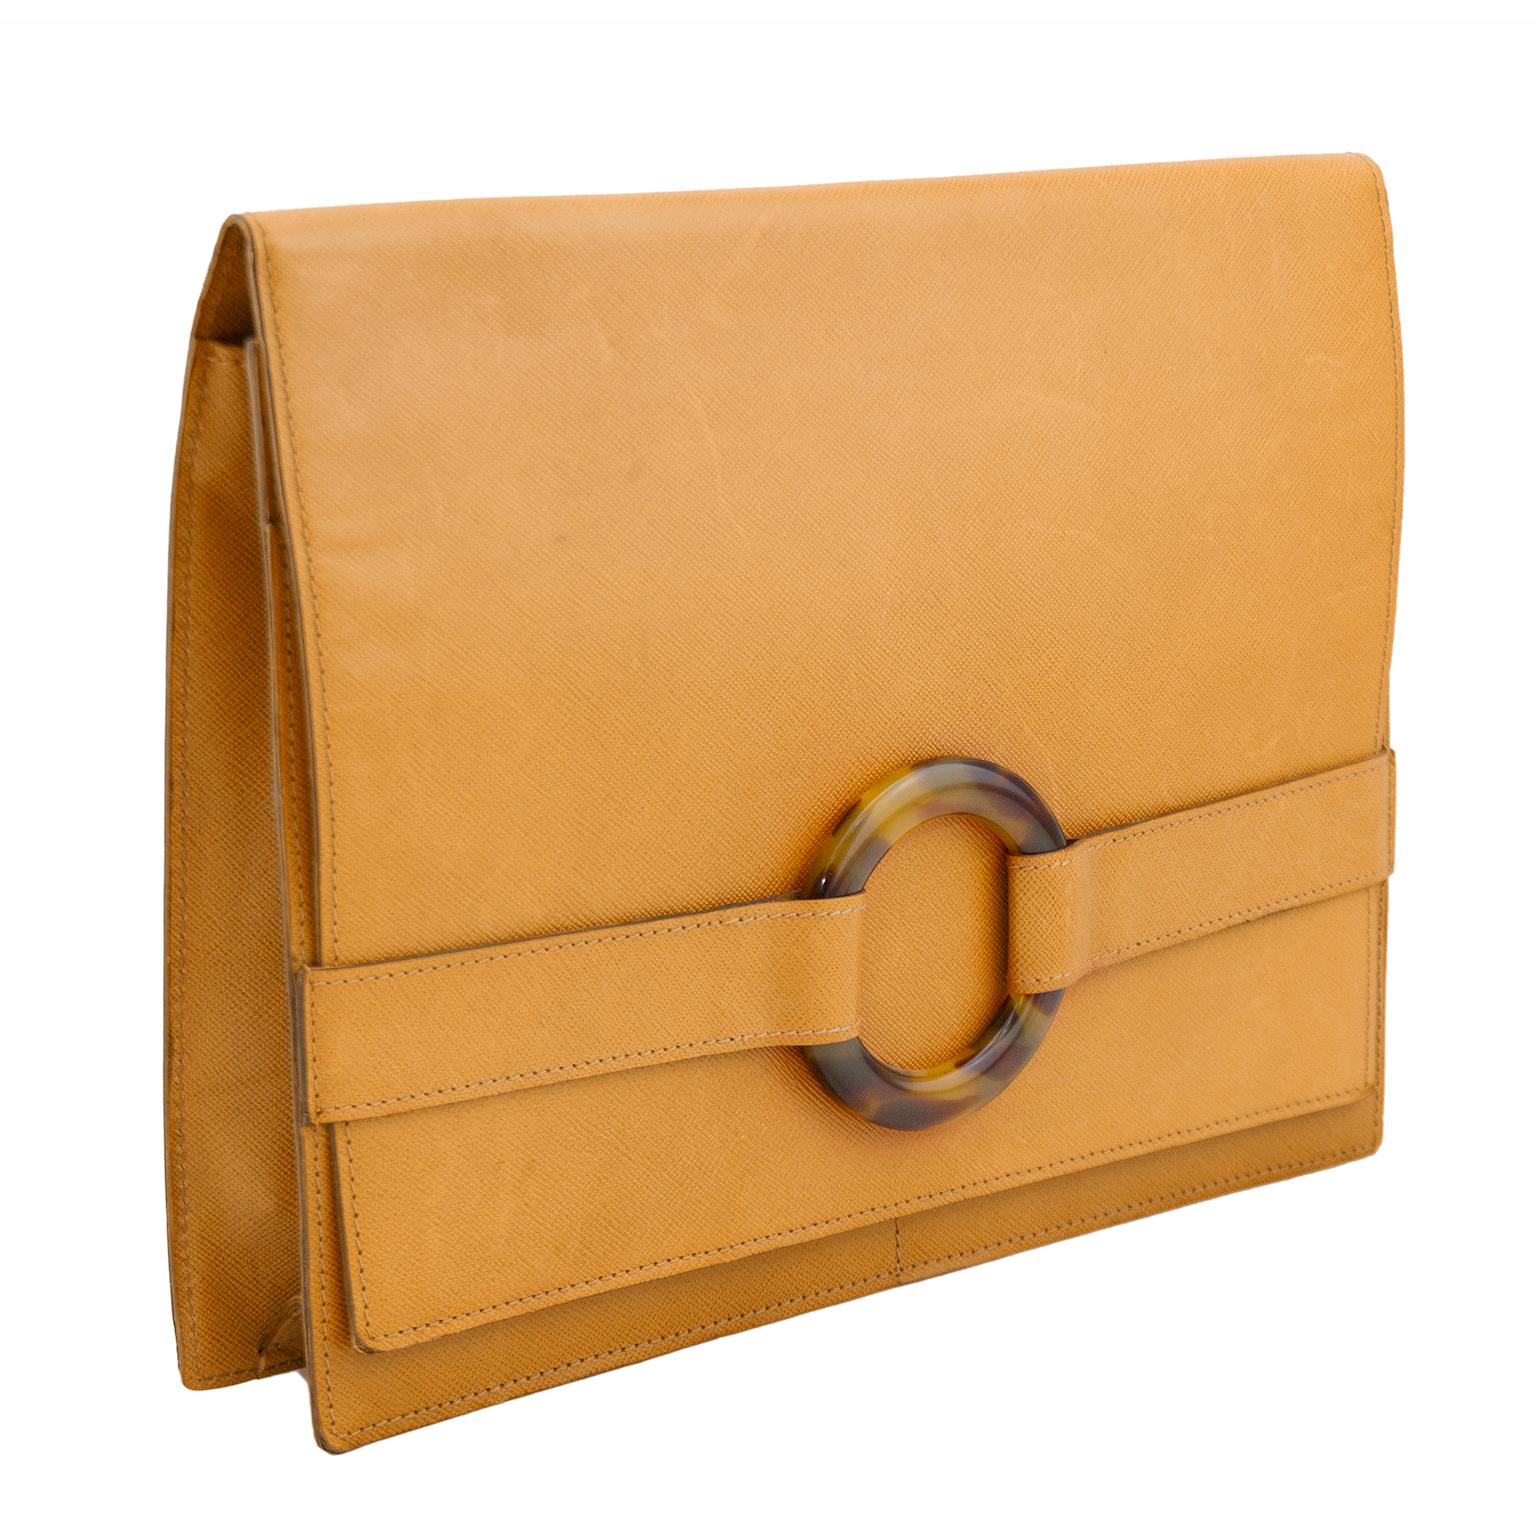 Stunning Christian Dior Boutique Paris envelope style clutch from the early 2000's. Tan rigid cross grain hatched leather with circular faux tortoiseshell hardware. Tan suede interior with slit pocket with zipper. Two exterior slit pockets with